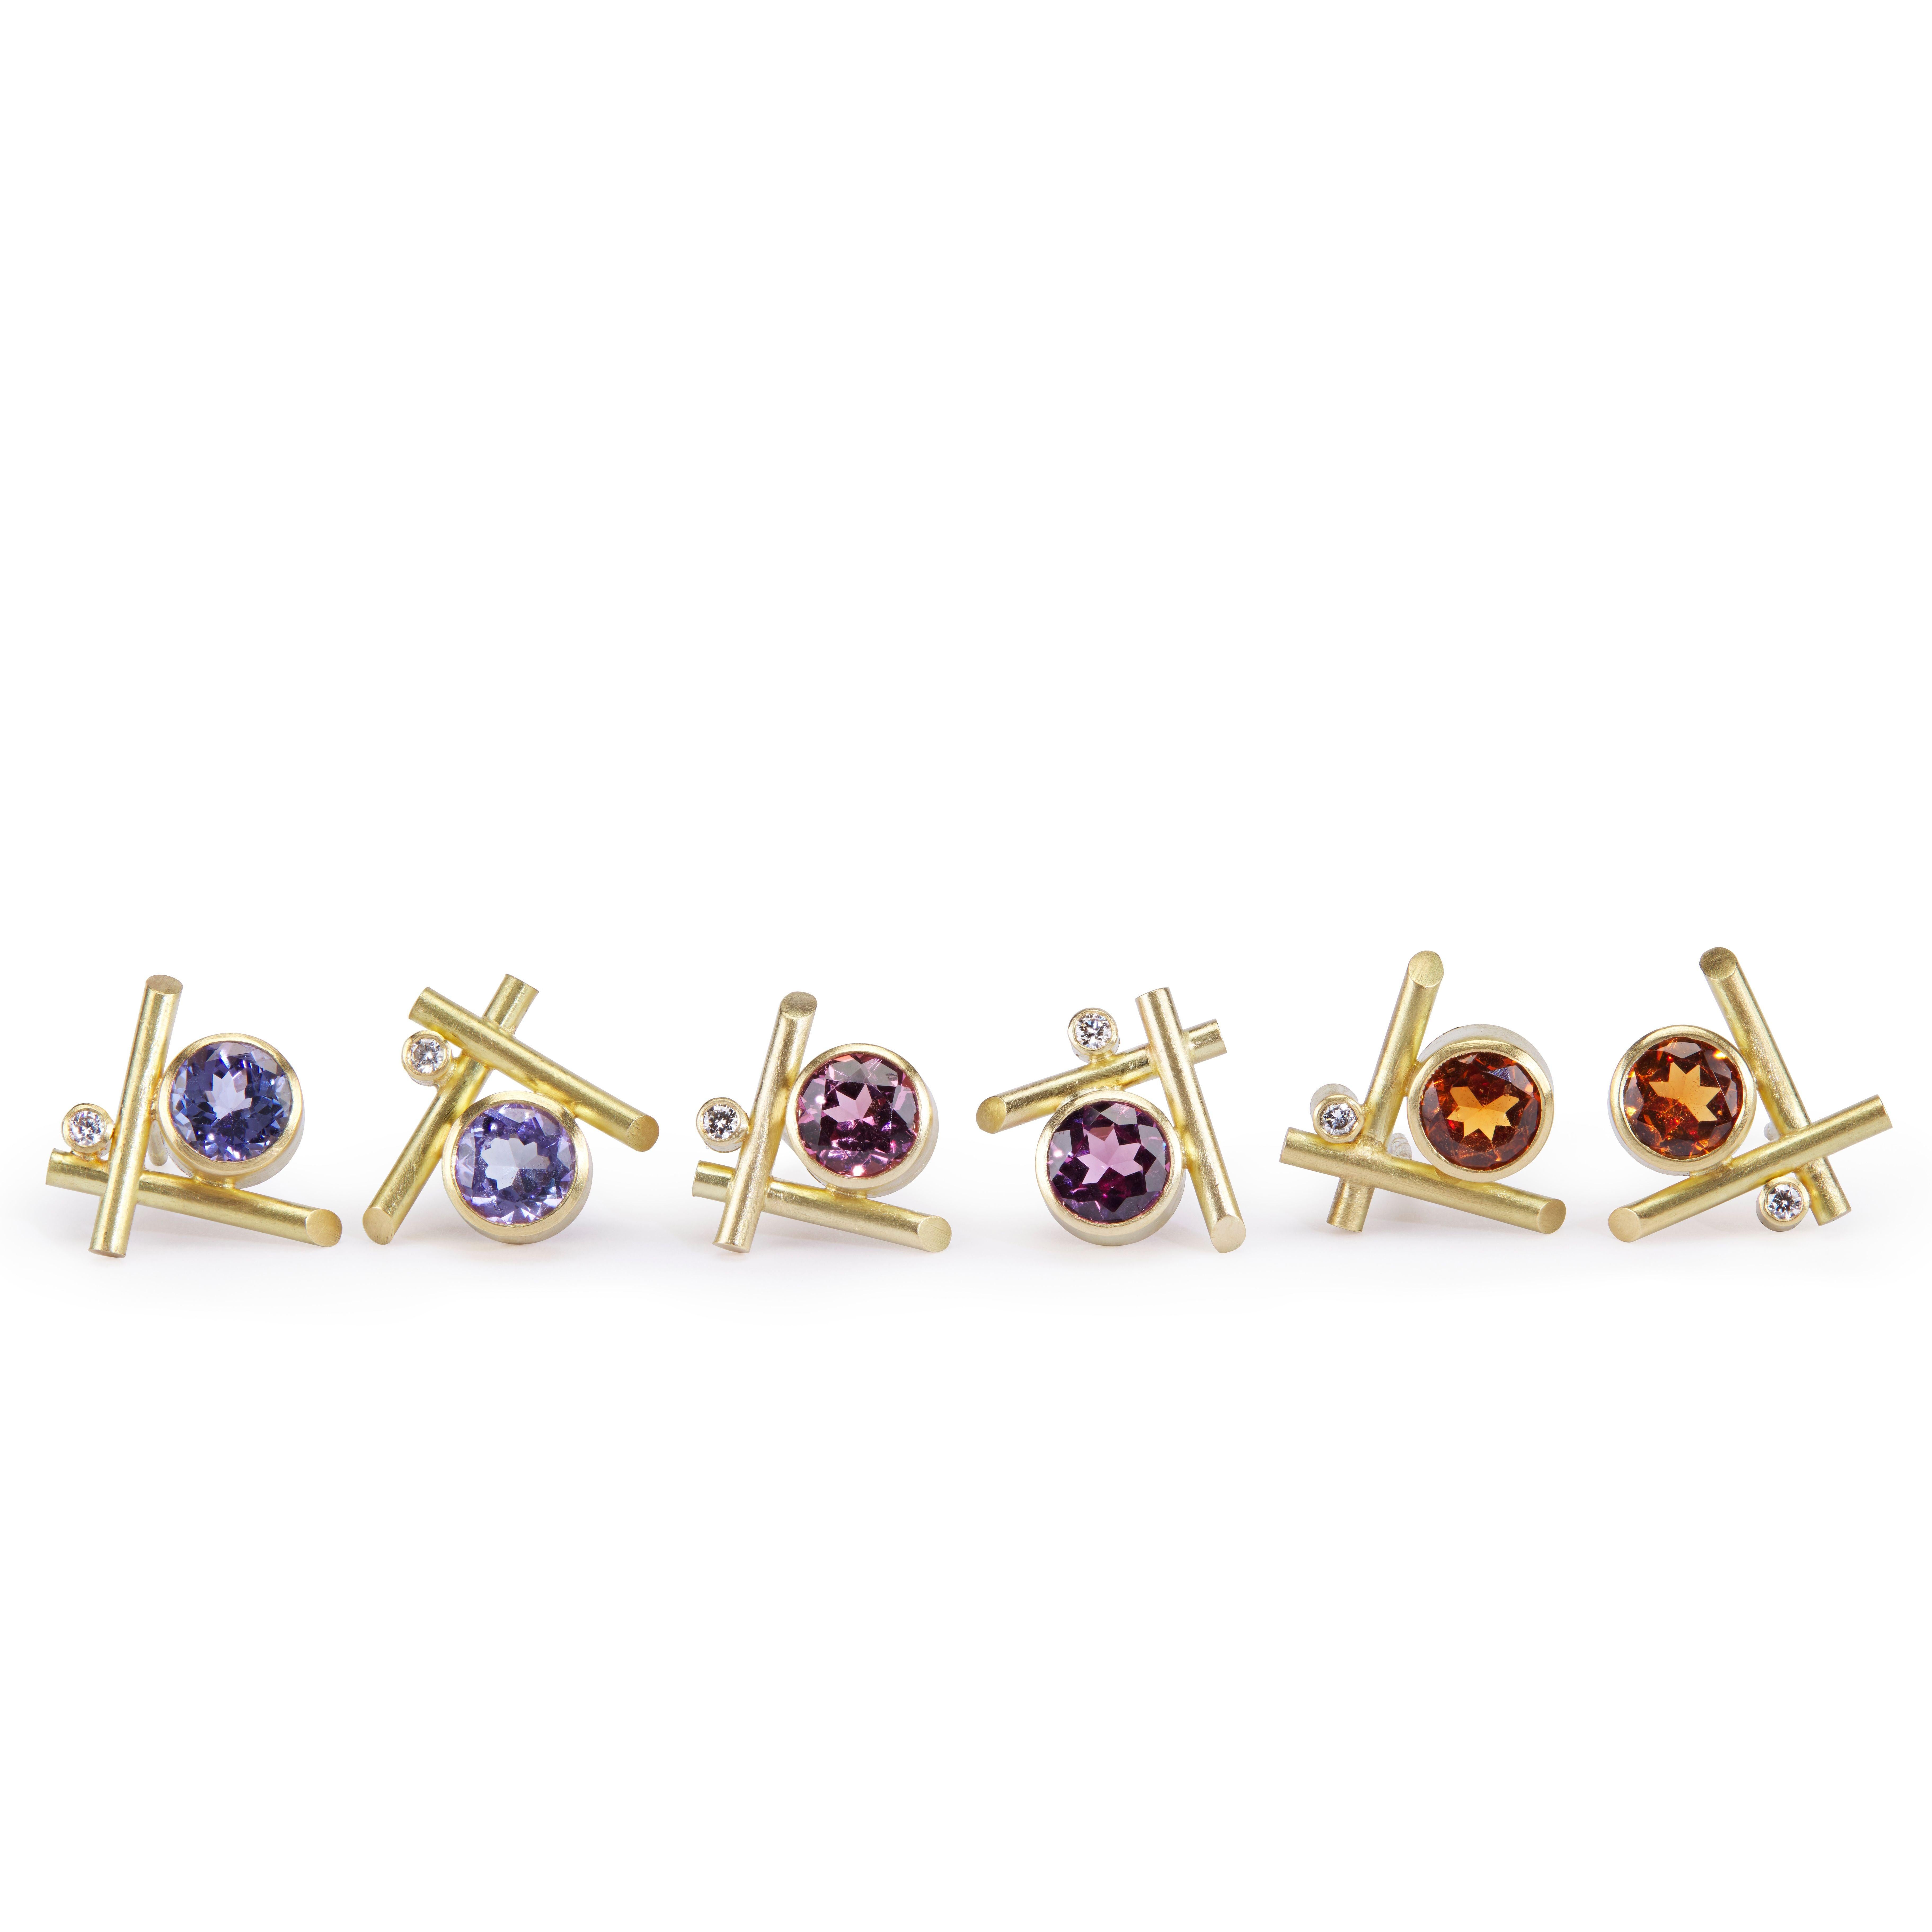 These very contemporary 18K gold stud pierced earrings feature a hessonite garnet accented by white diamonds. The garnet is a 5mm round. 
These earrings are designed and made by London jeweler, Lucy Martin. Lucy creates art jewelry with a unique